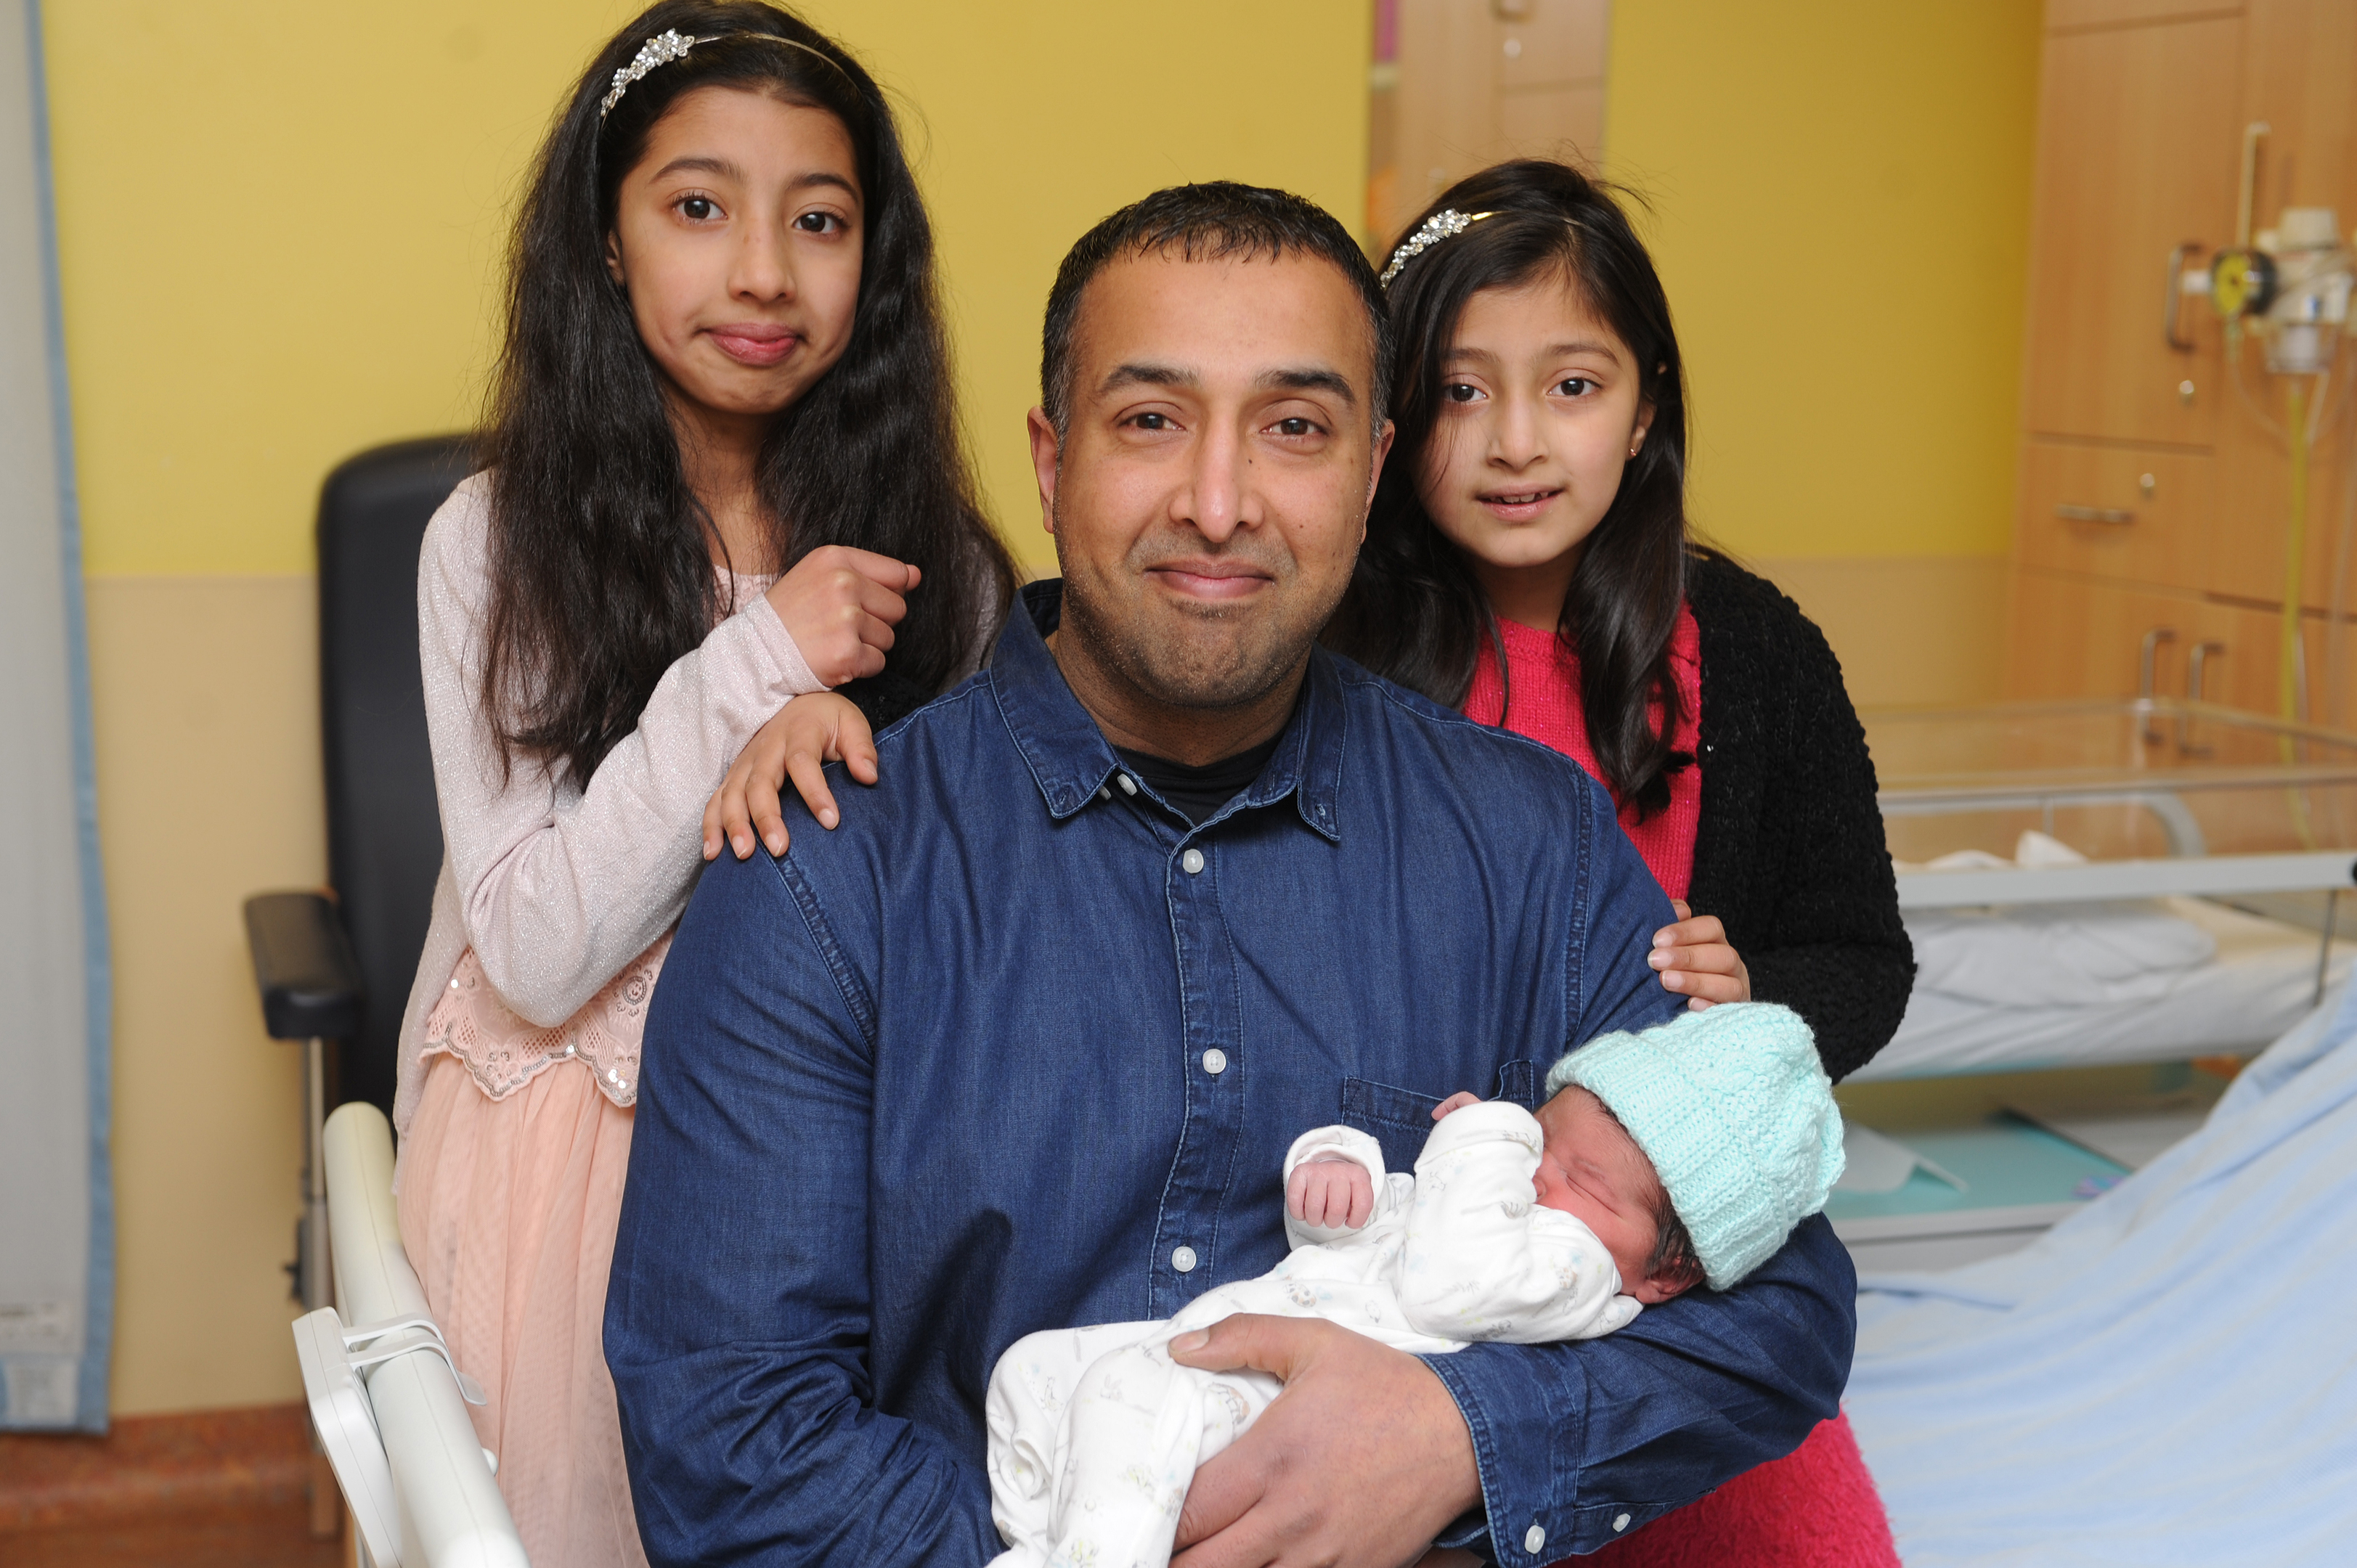 Alishba, Naz and Ikra Ahmed with the latest addition to the family. The baby, who is yet to be named, was born at 12.44am weighing 3.62kg at Ninewells Hospital, Dundee